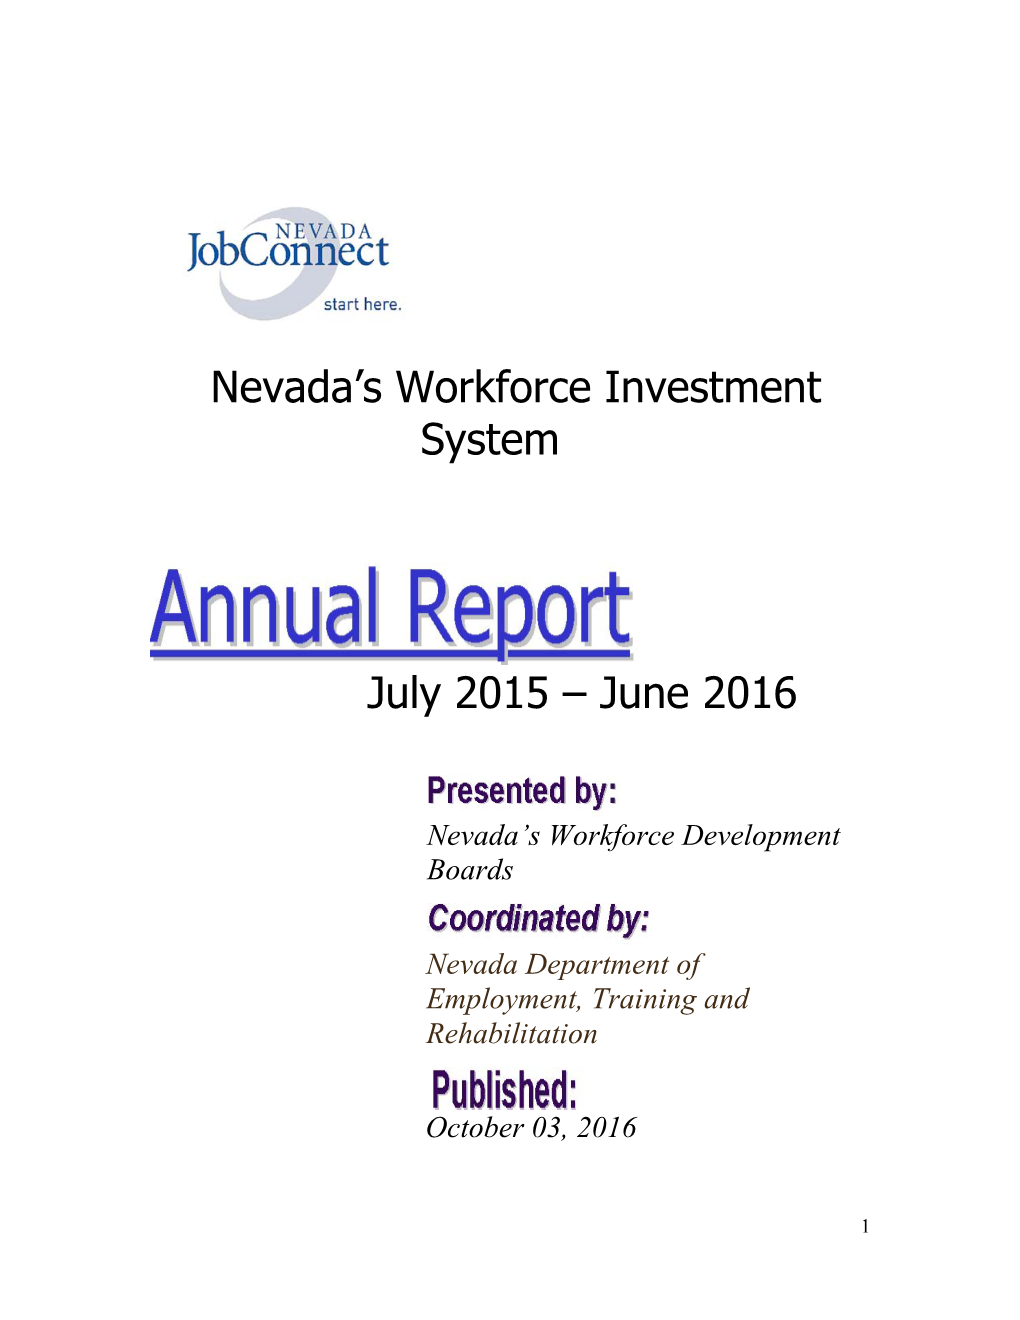 Nevada's Workforce Investment System July 2015 – June 2016